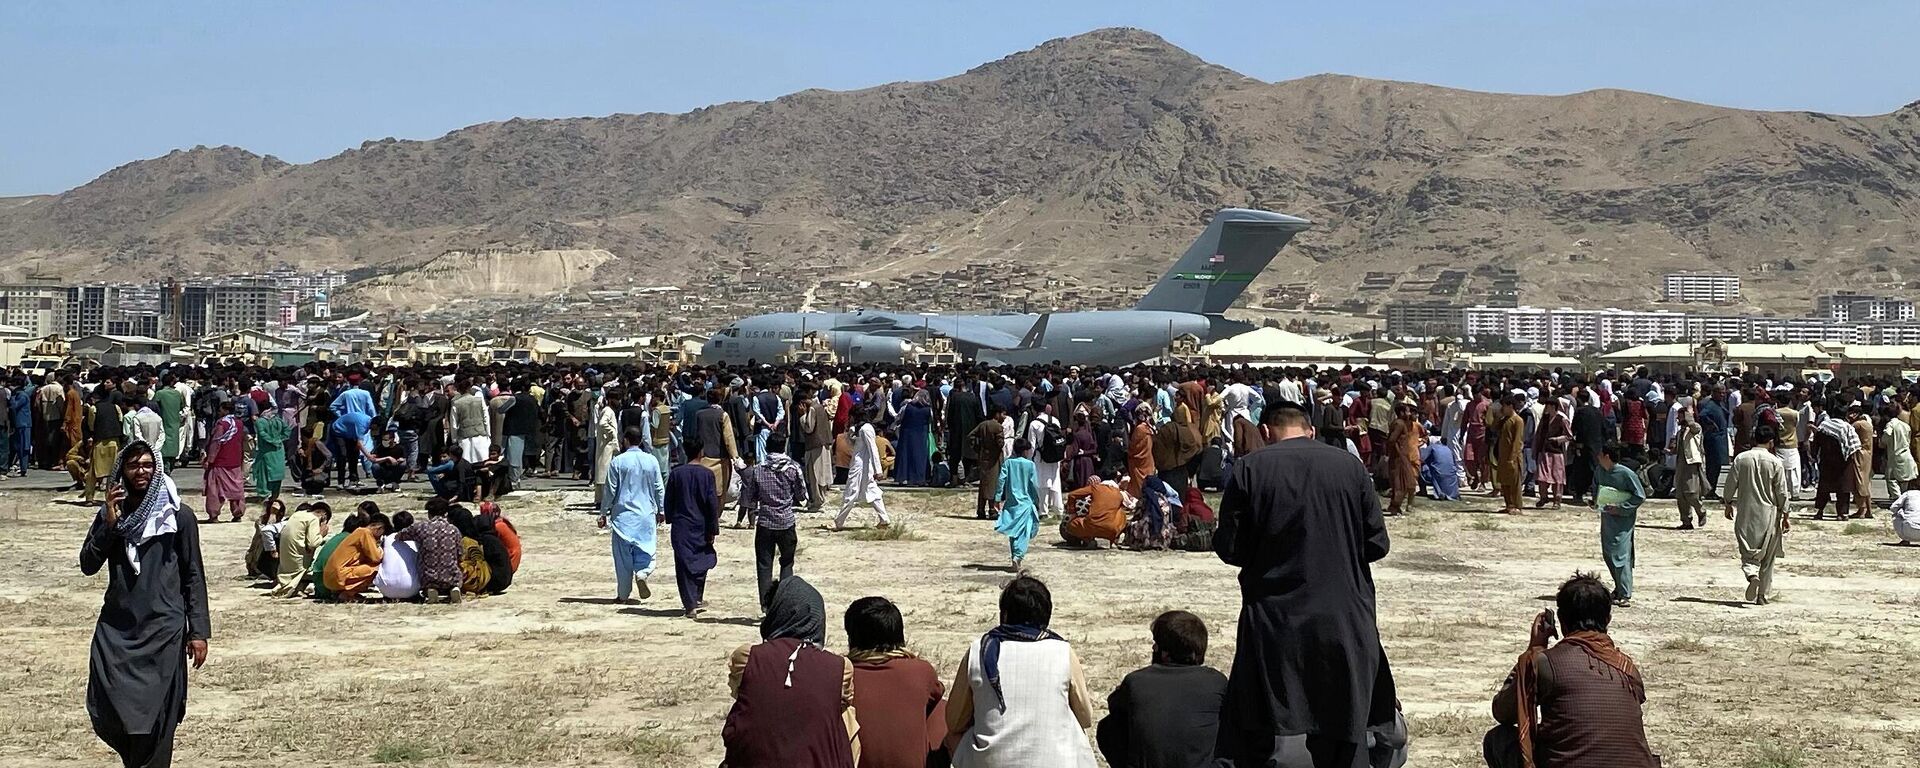  In this Aug. 16, 2021, file photo, hundreds of people gather near a U.S. Air Force C-17 transport plane at the perimeter of the international airport in Kabul, Afghanistan. Ordinary Americans and the nation's airlines are combining to donate miles and cash to help Afghan refugees resettle in the United States. Organizers said Tuesday, Oct. 26, they have raised enough donations pay for 40,000 flights, but they're hoping to nearly double that amount.  - Sputnik International, 1920, 28.08.2022